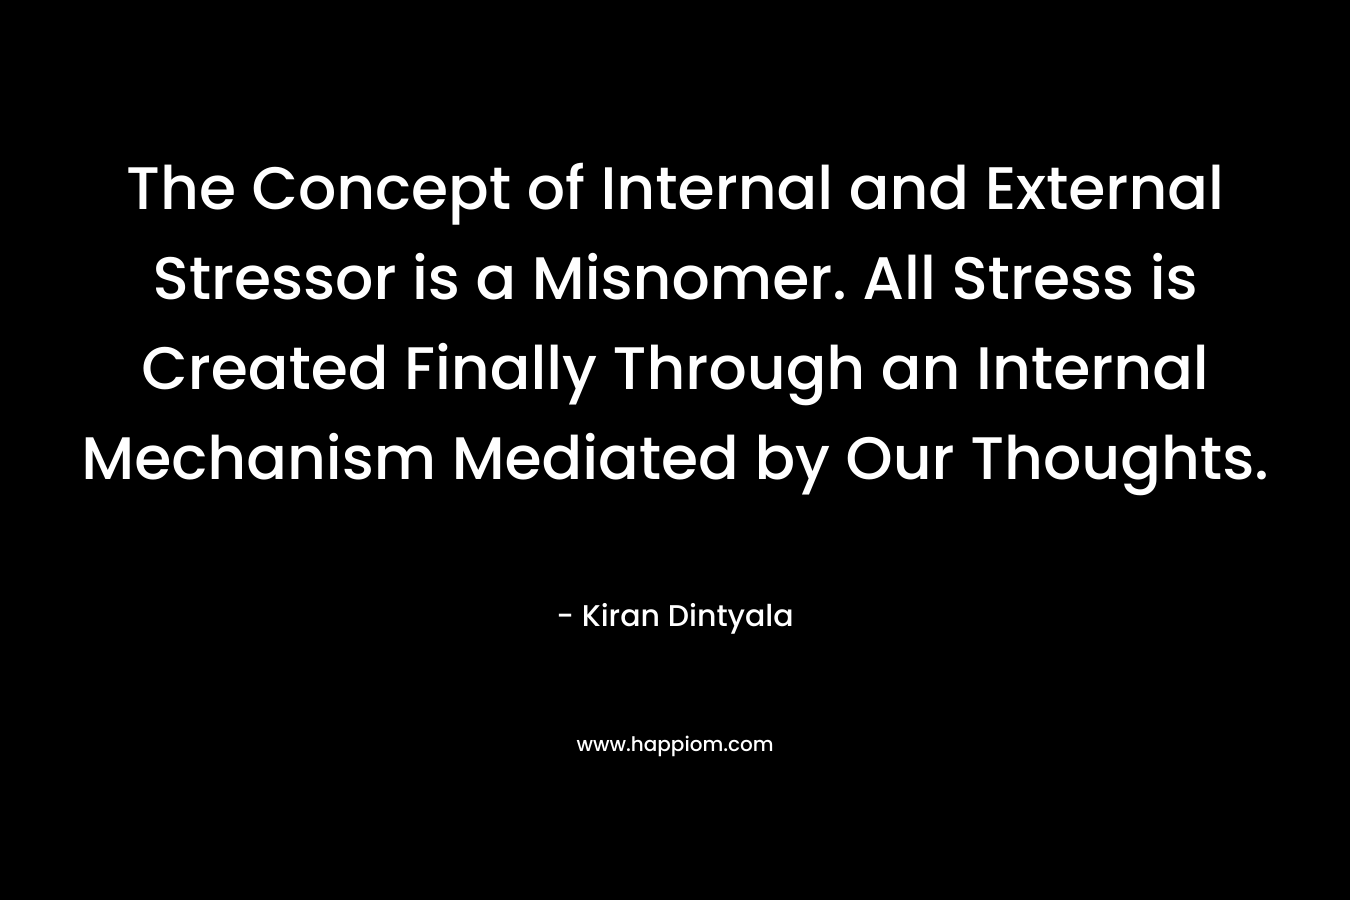 The Concept of Internal and External Stressor is a Misnomer. All Stress is Created Finally Through an Internal Mechanism Mediated by Our Thoughts.